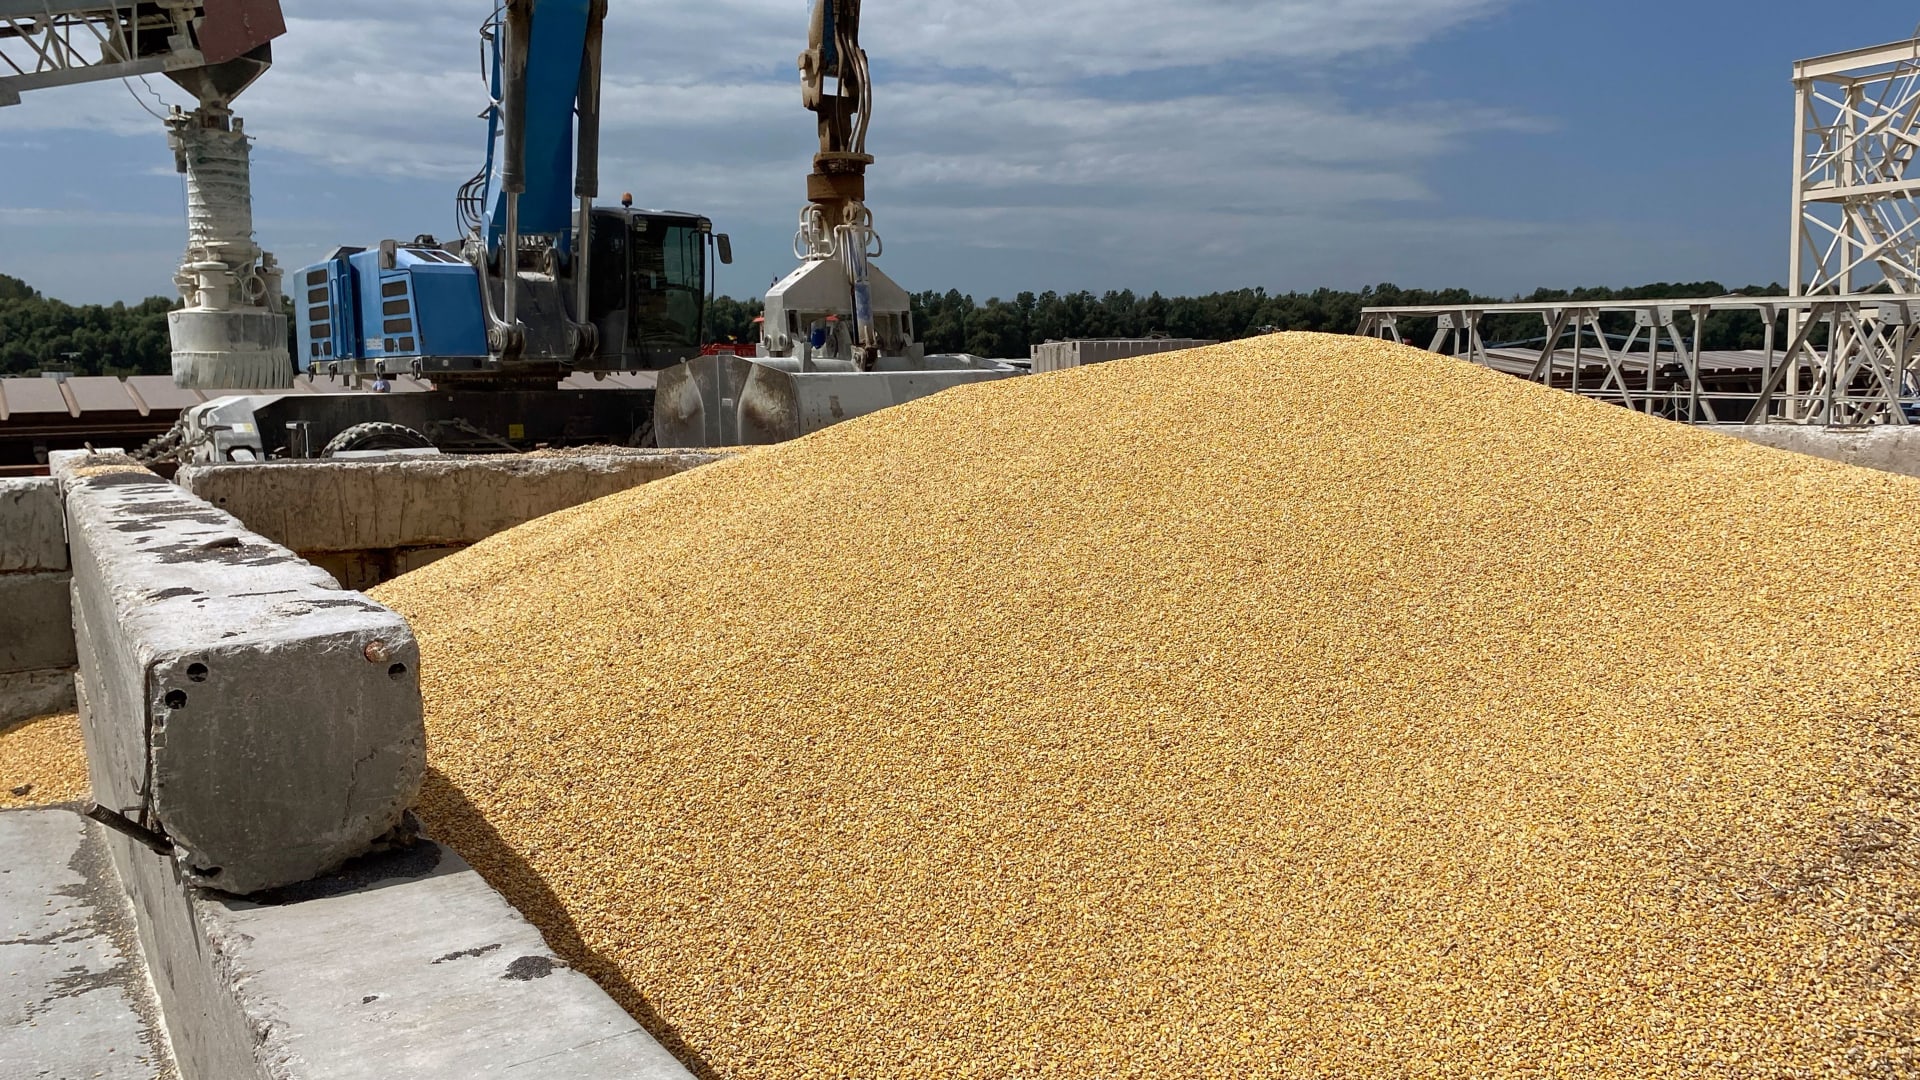 A pile of maize grains is seen on the pier at the Izmail Sea Port, Odesa region, on July 22, 2023.